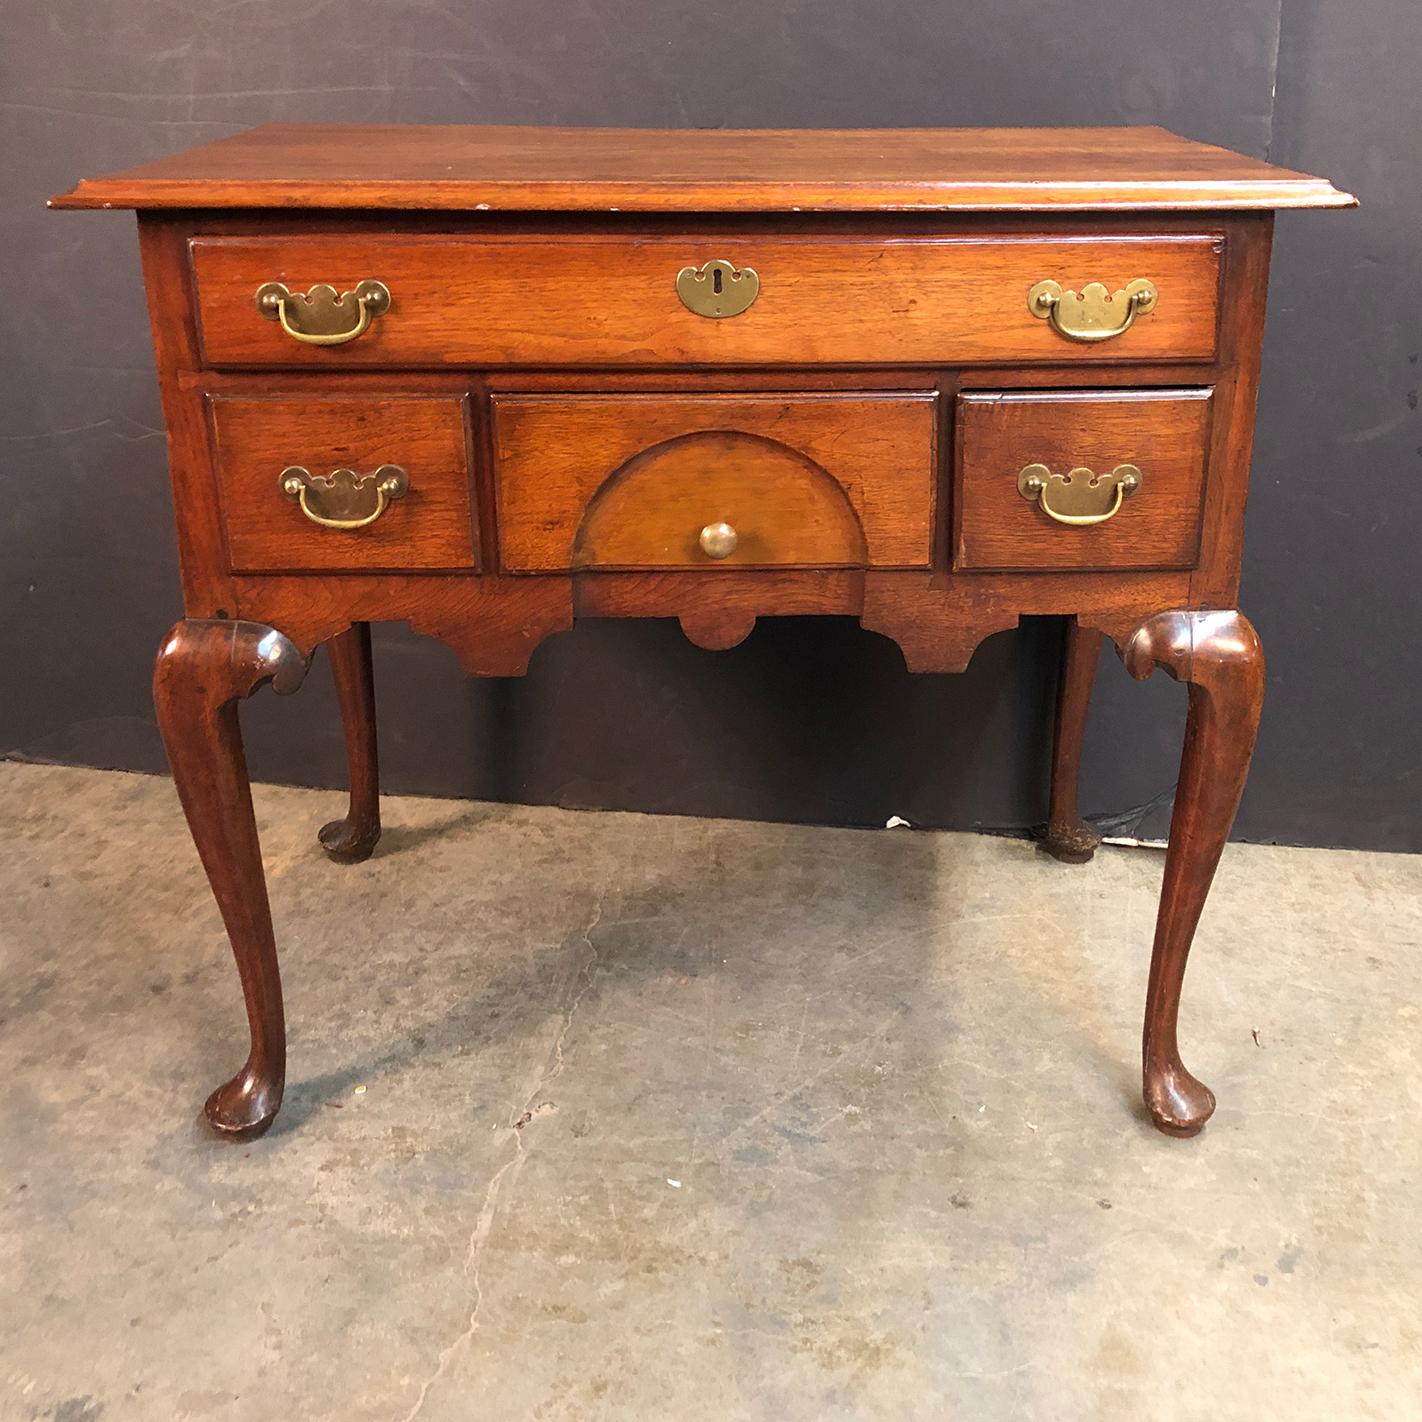 A fine 18th century Queen Anne New England walnut four-drawer low boy dressing table with brass handles, cabriole legs and pad feet.